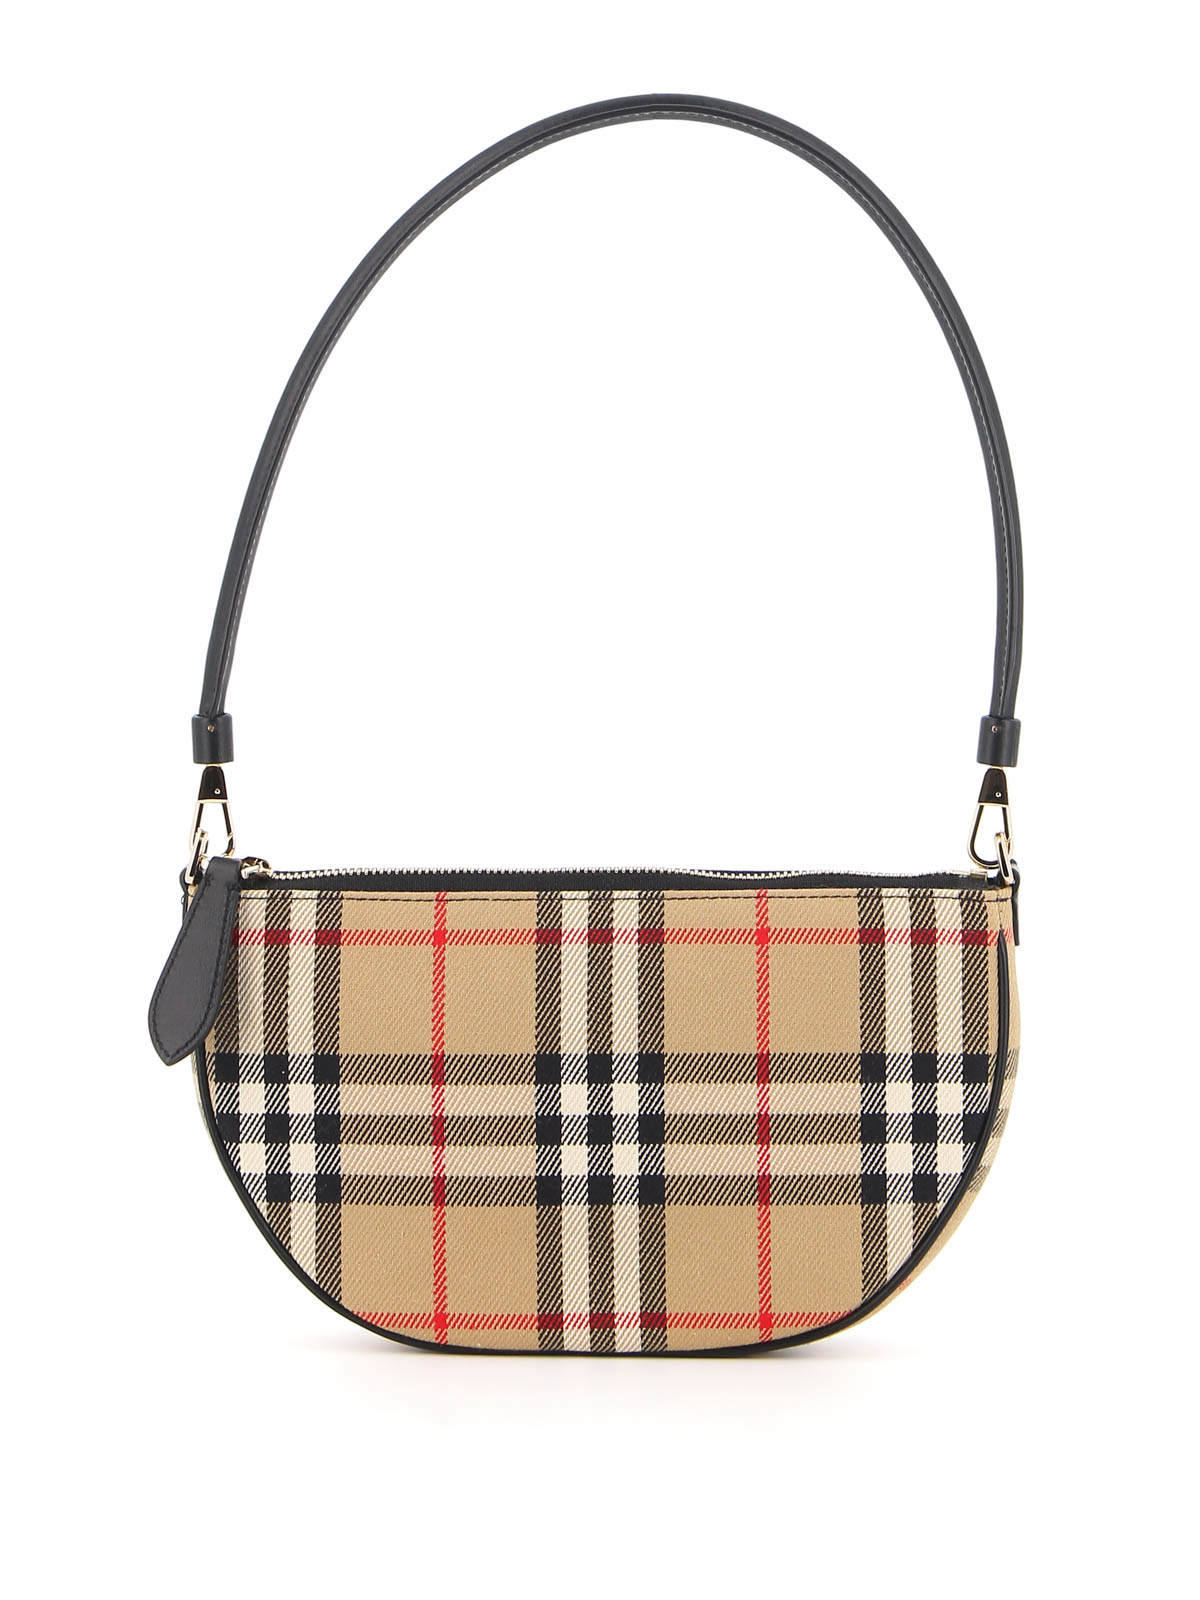 Burberry - Olympia bag - cross body bags - 8036728 | Shop online at iKRIX